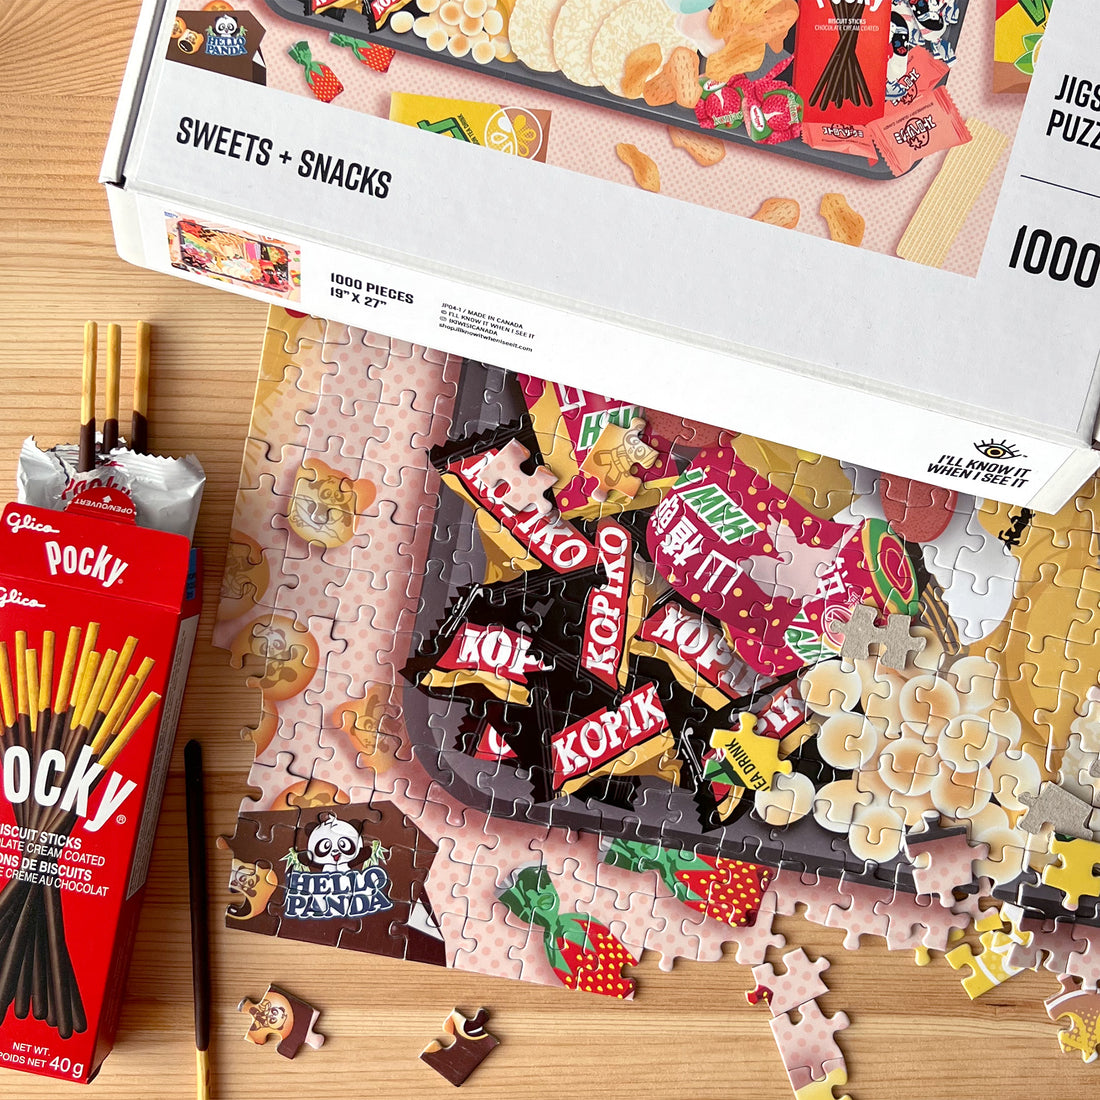 Asian sweets and snacks 1000 piece jigsaw puzzle by I&